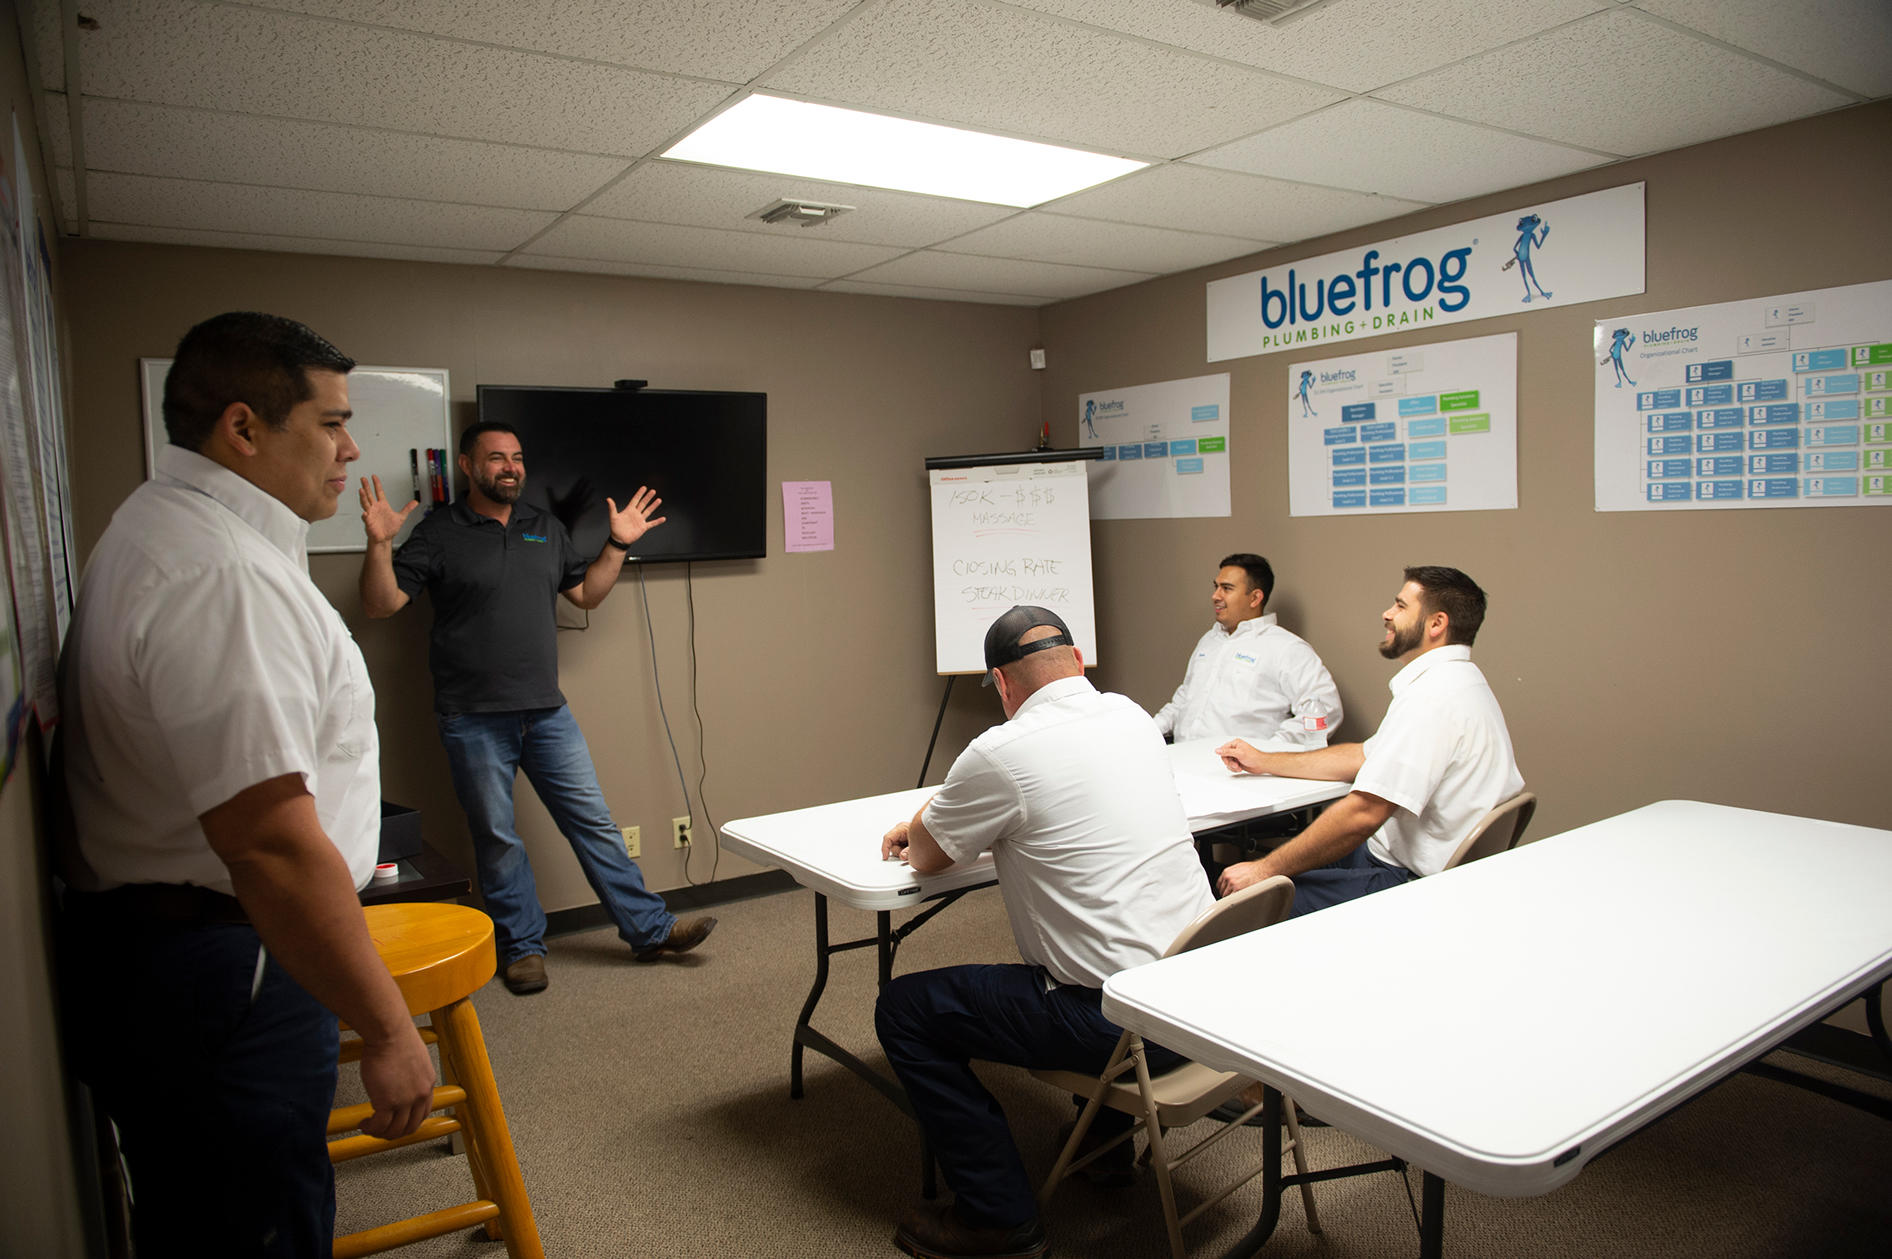 bluefrog Plumbing + Drain of West Houston techs sitting at tables ready for a day helping the people of West Houston.